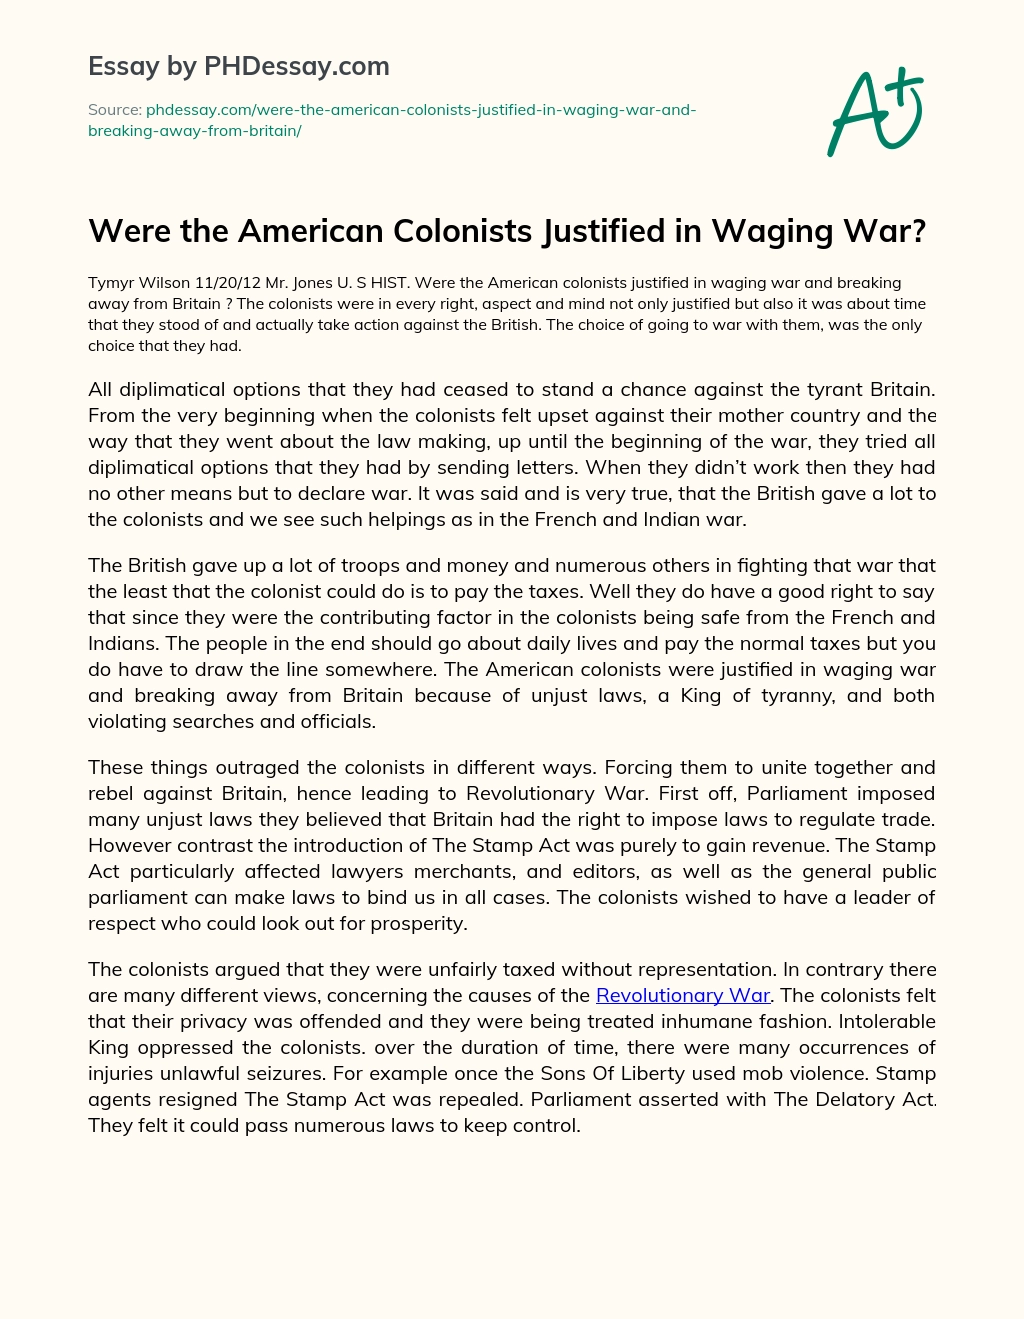 Were the American Colonists Justified in Waging War? essay